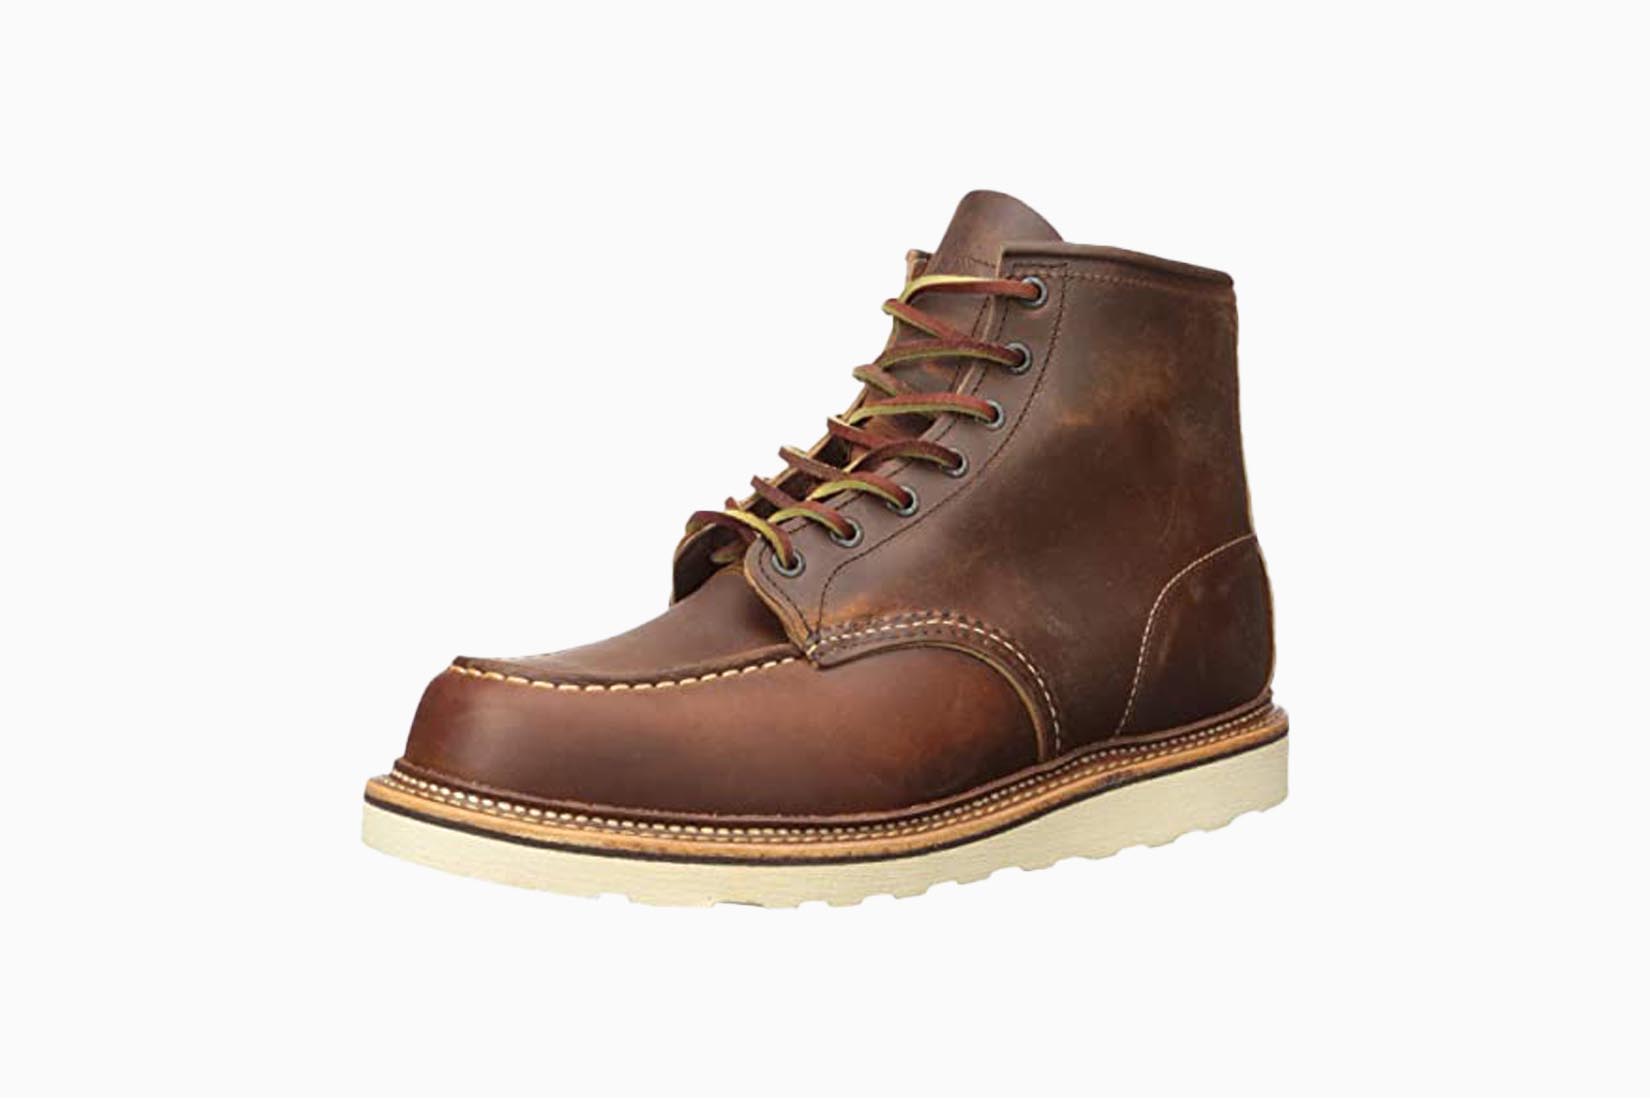 best boots men red wing heritage classic boot review Luxe Digital